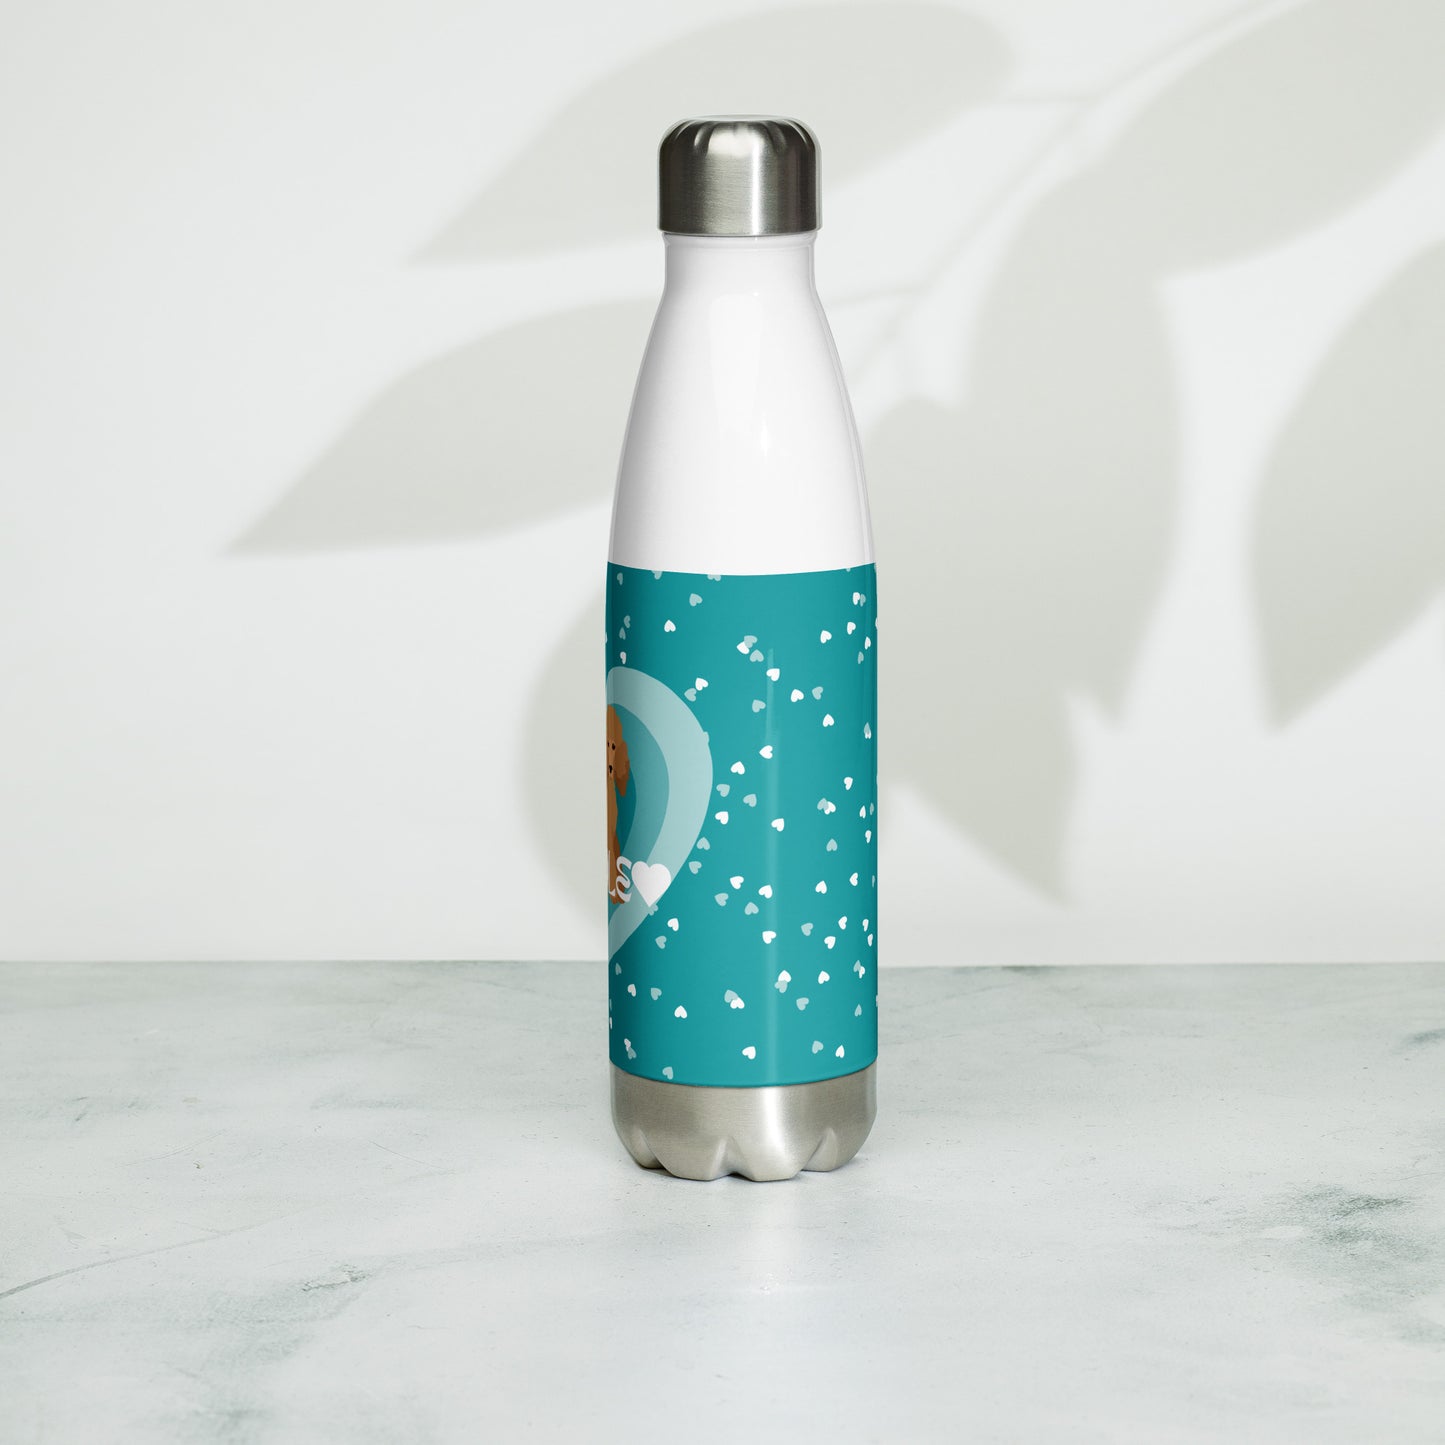 "Love" Stainless steel water bottle in teal - Poodle